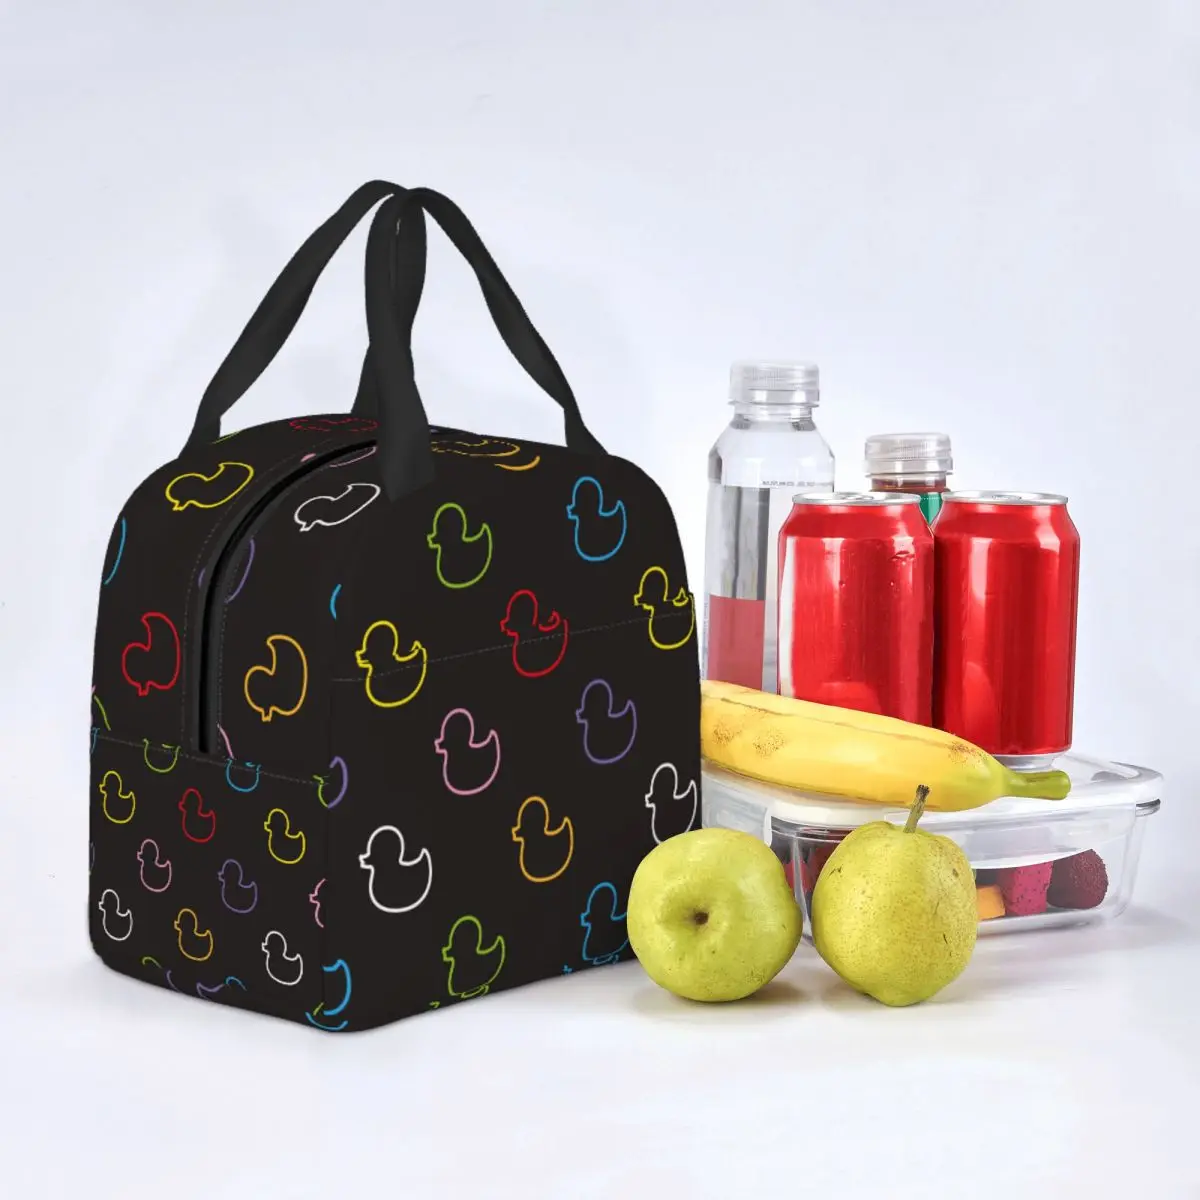 Lunch Bags for Men Women Duck Thermal Cooler Bag Portable Picnic Animal Canvas Lunch Box Handbags